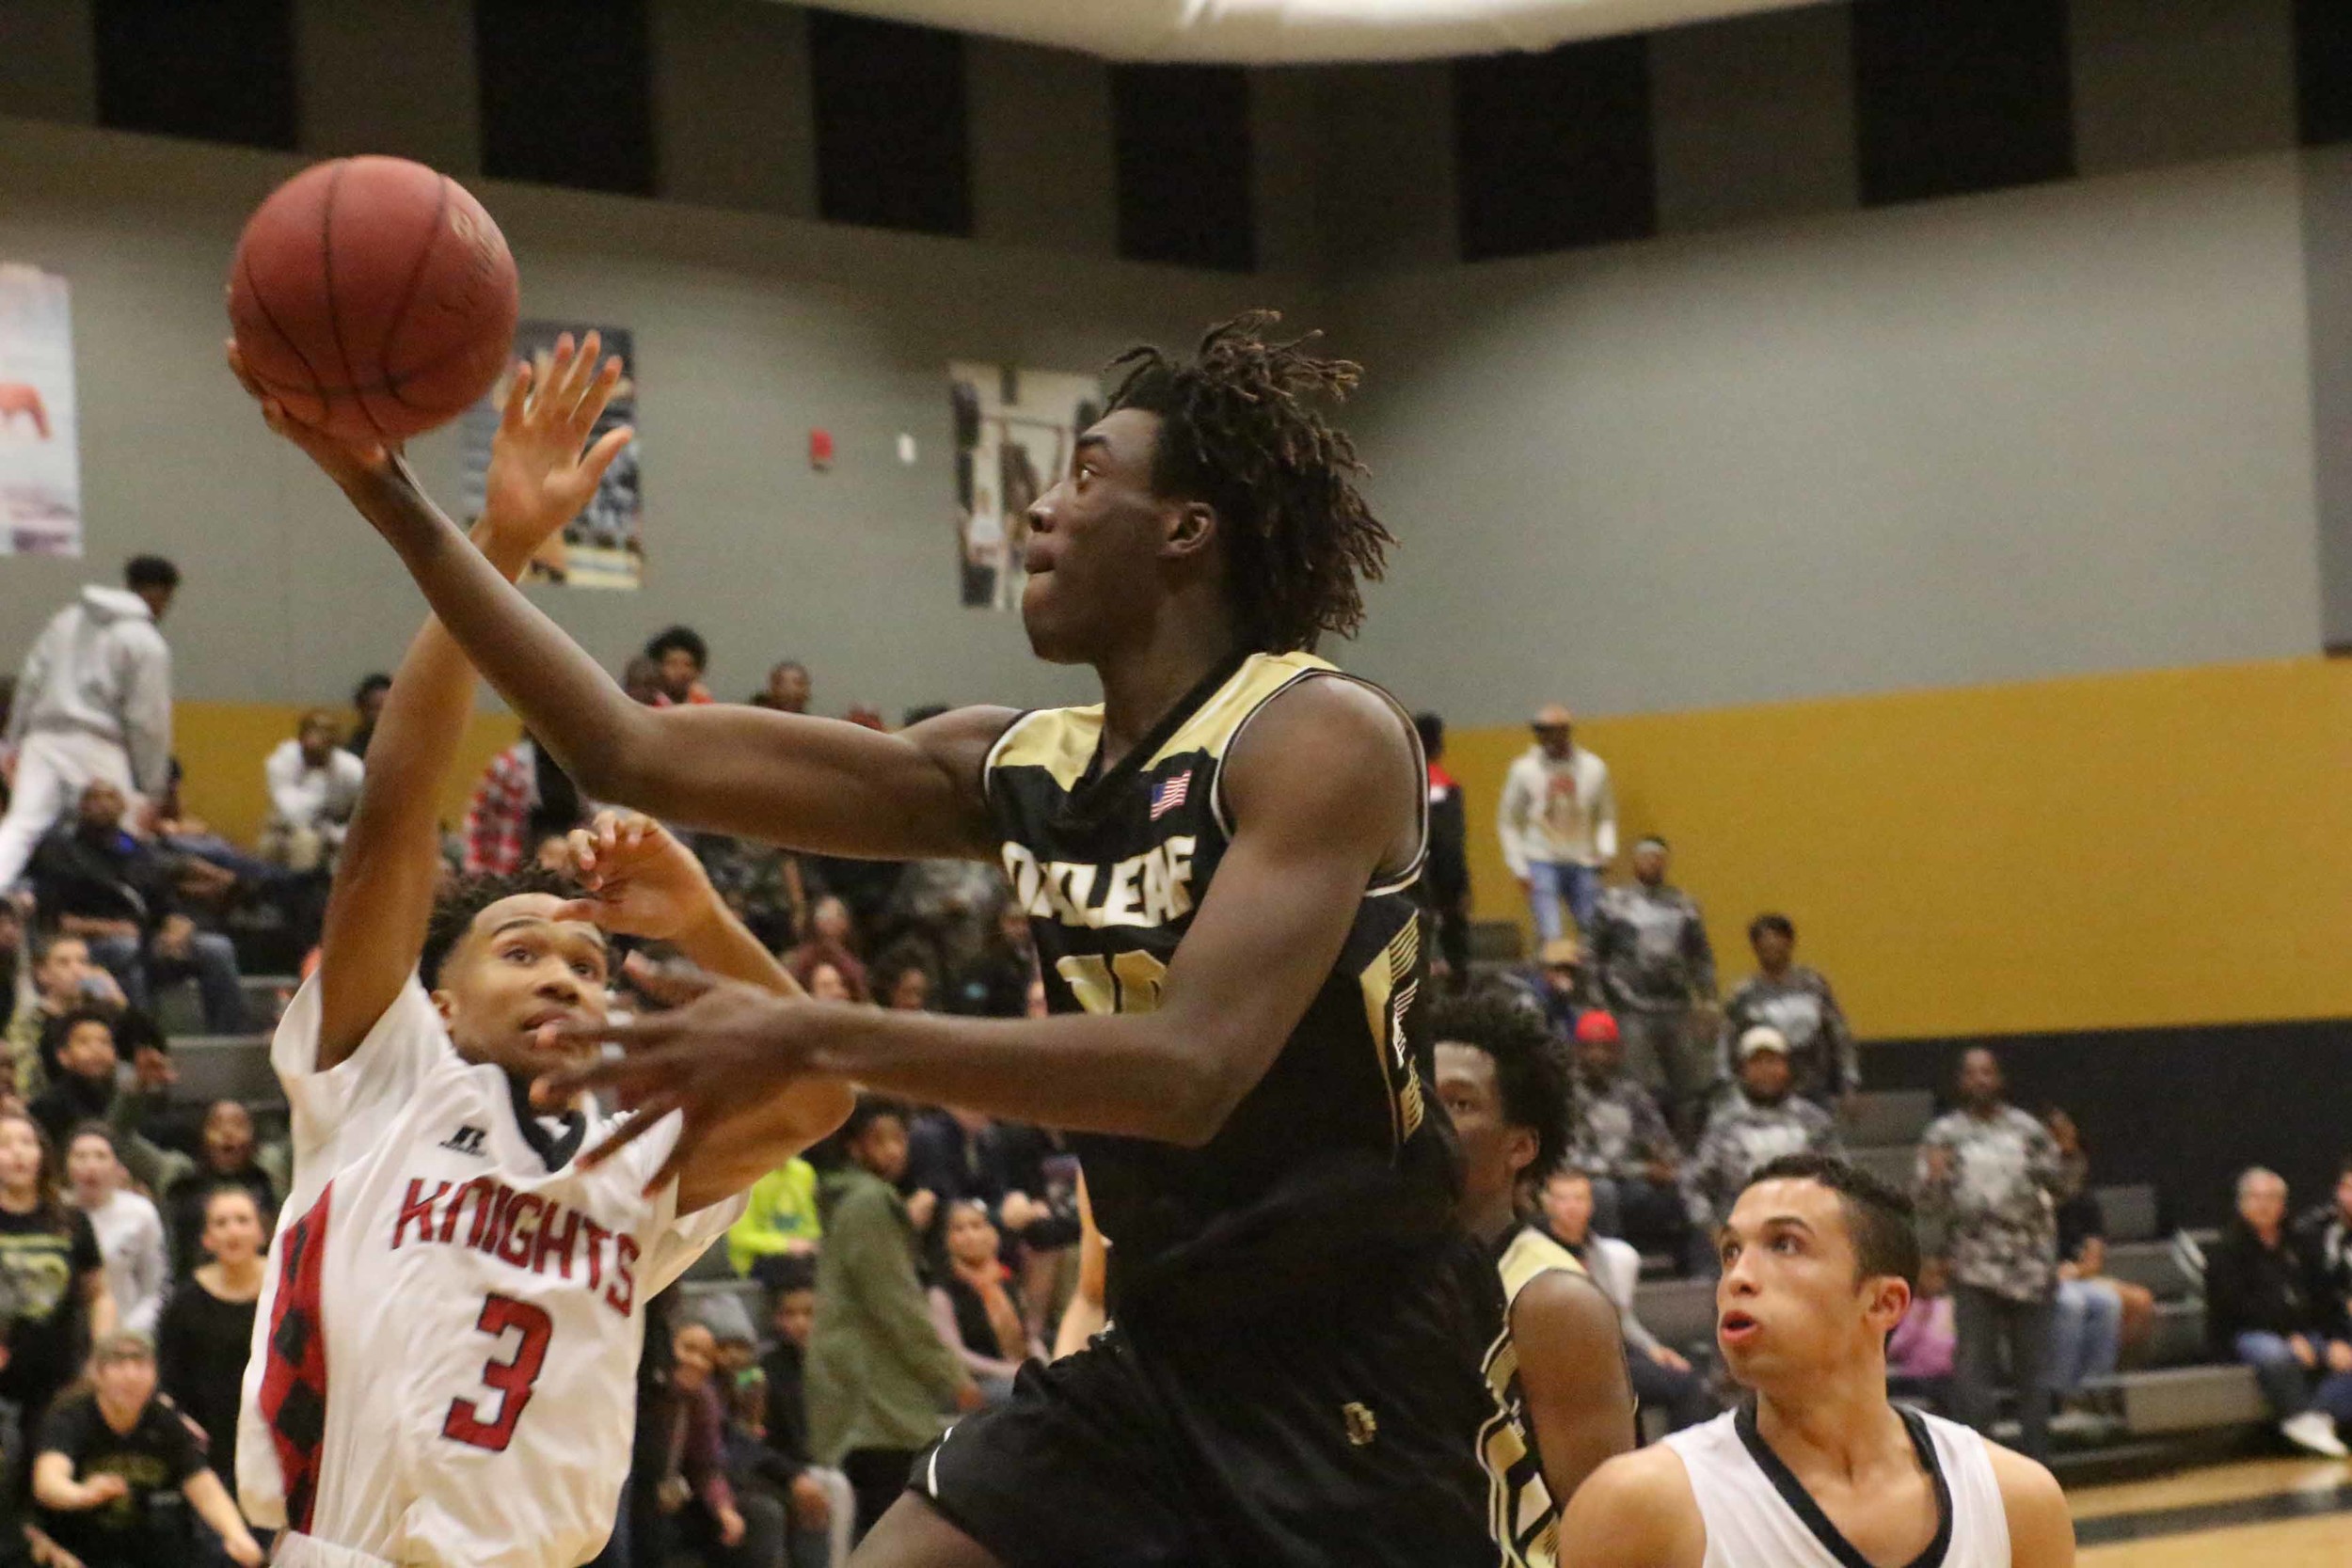 Oakleaf High sophomore Nassir Little made a big splash as a freshman then came on strong this year as a shot blocker and rebounder for the district champion Knights. Little has numerous college offers including the University of Florida.